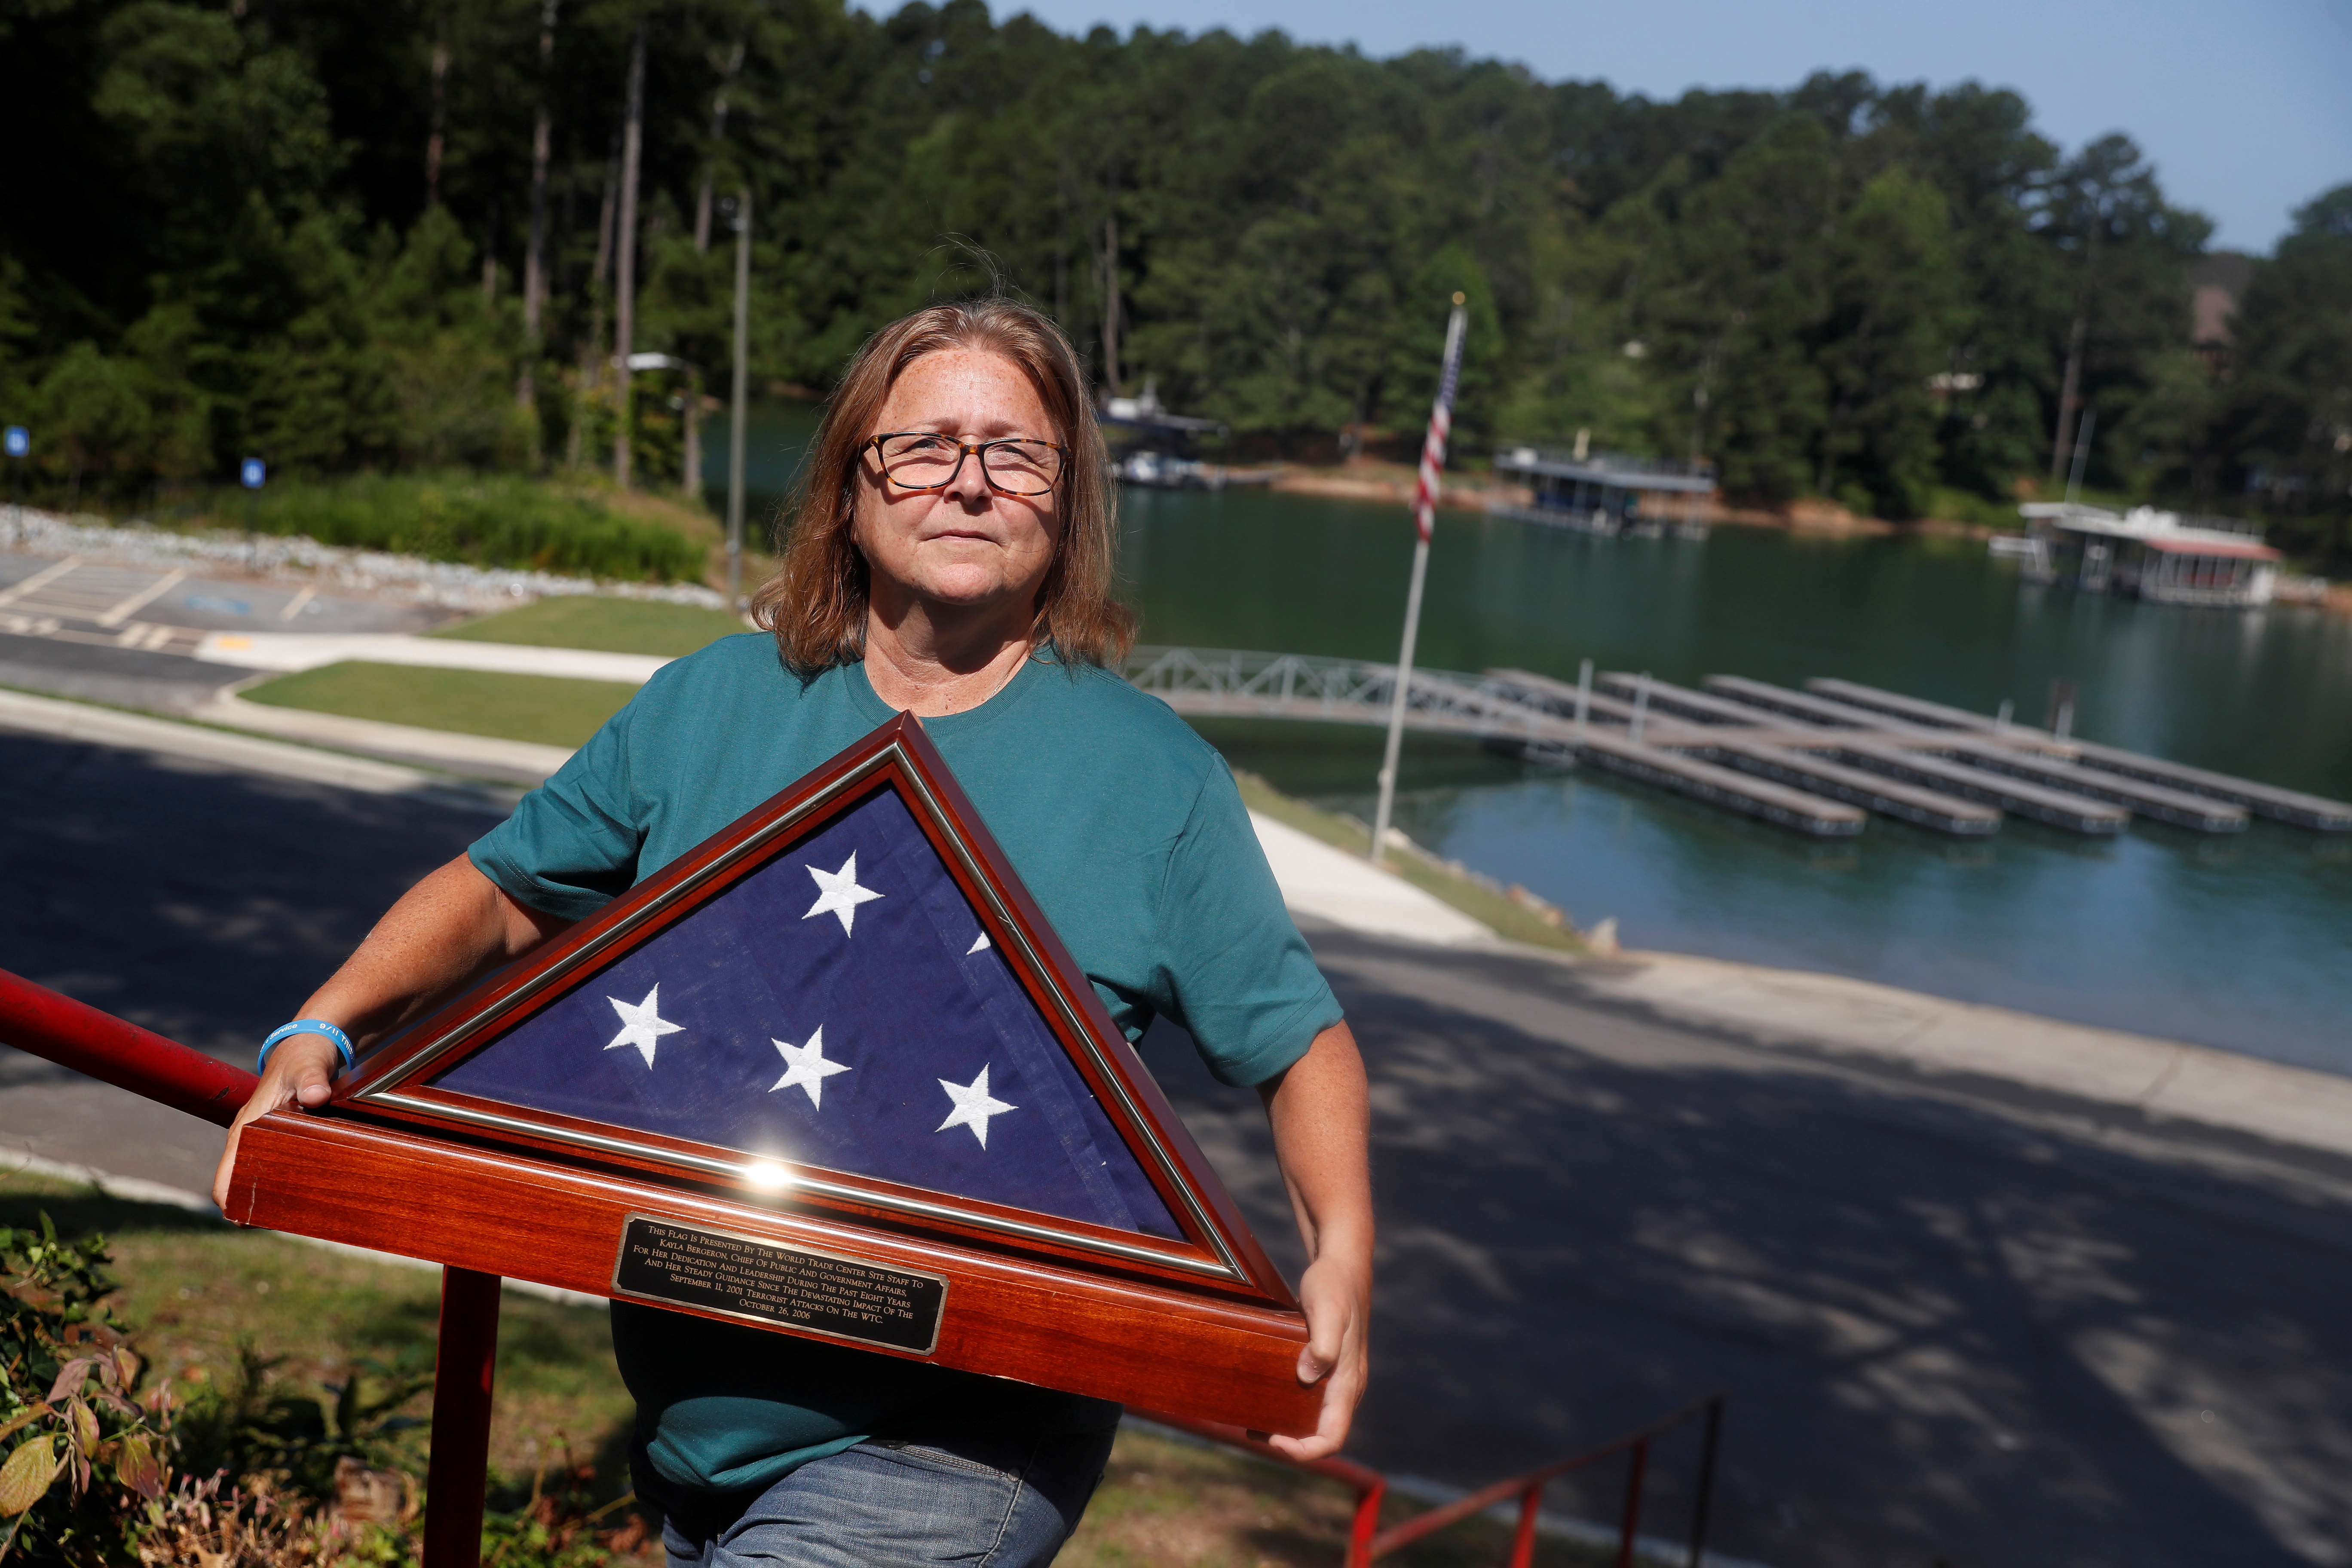 Kayla Bergeron poses with a framed U.S. flag given to her by the agency when she left in 2006 at Lake Lanier in Cumming, Georgia, July 4, 2021. REUTERS/Shannon Stapleton   